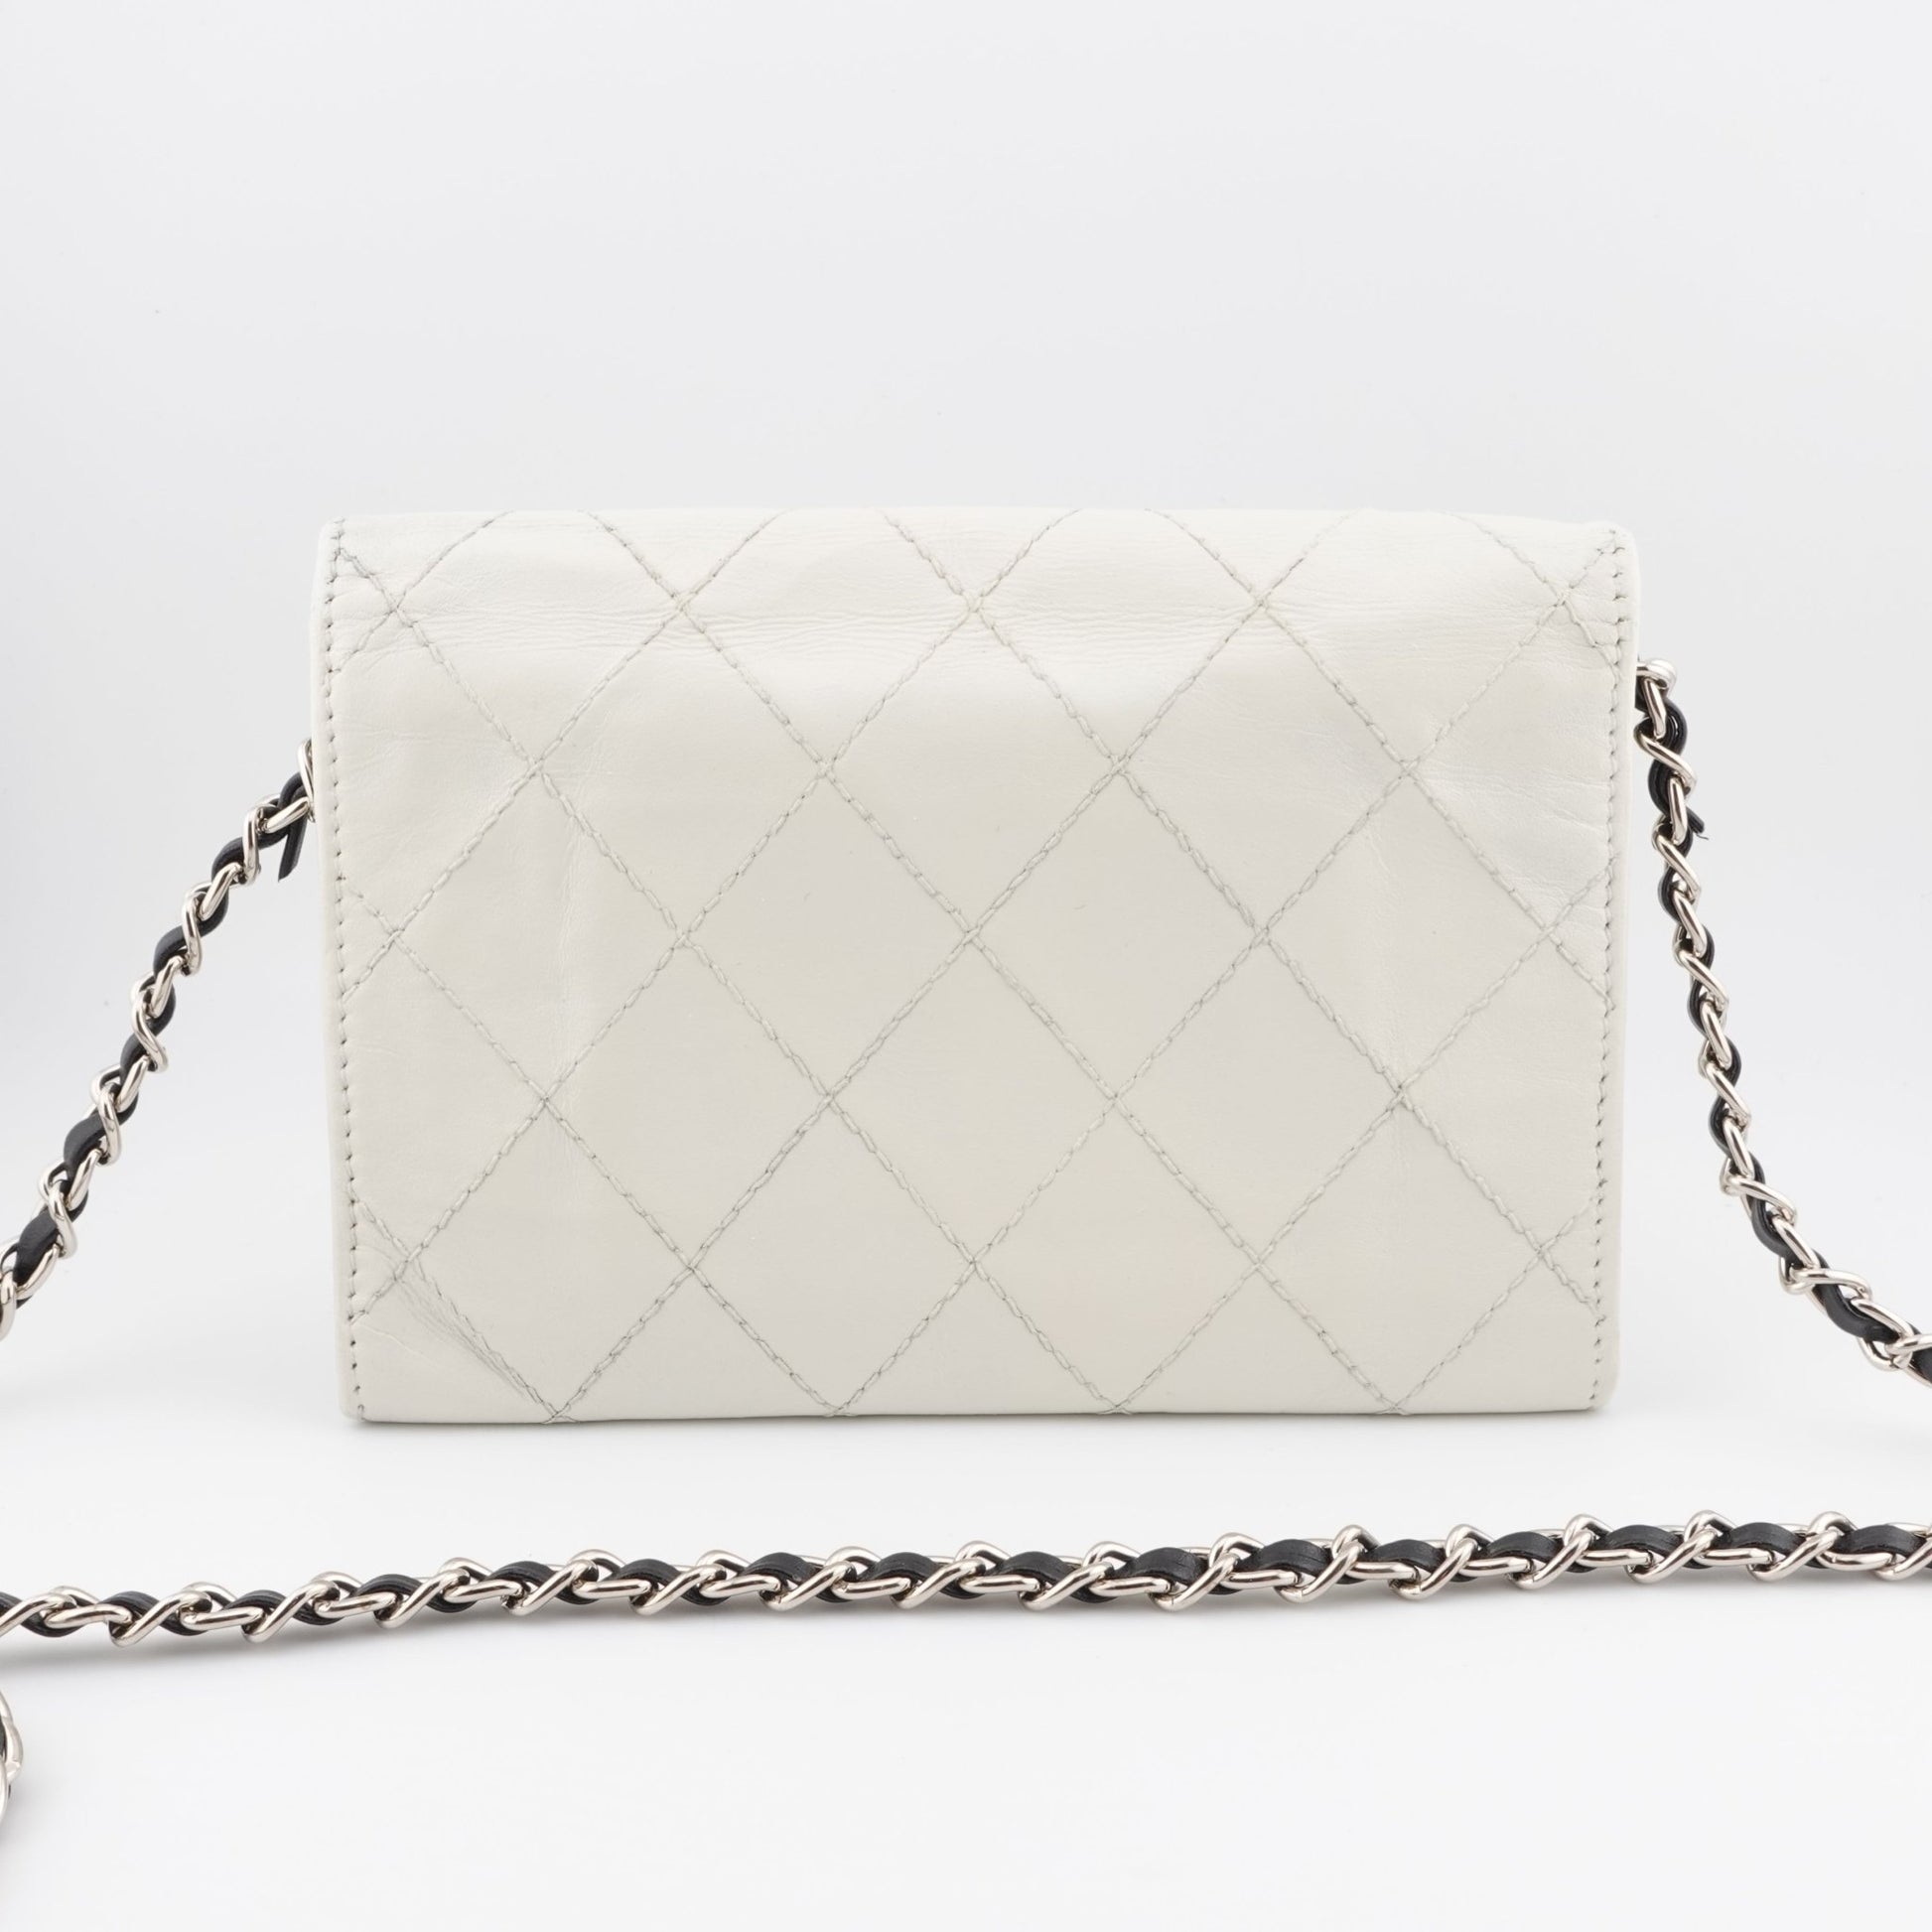 CHANEL Lambskin Cambon Compact Wallet On Adjustable Chain - Bag Envy